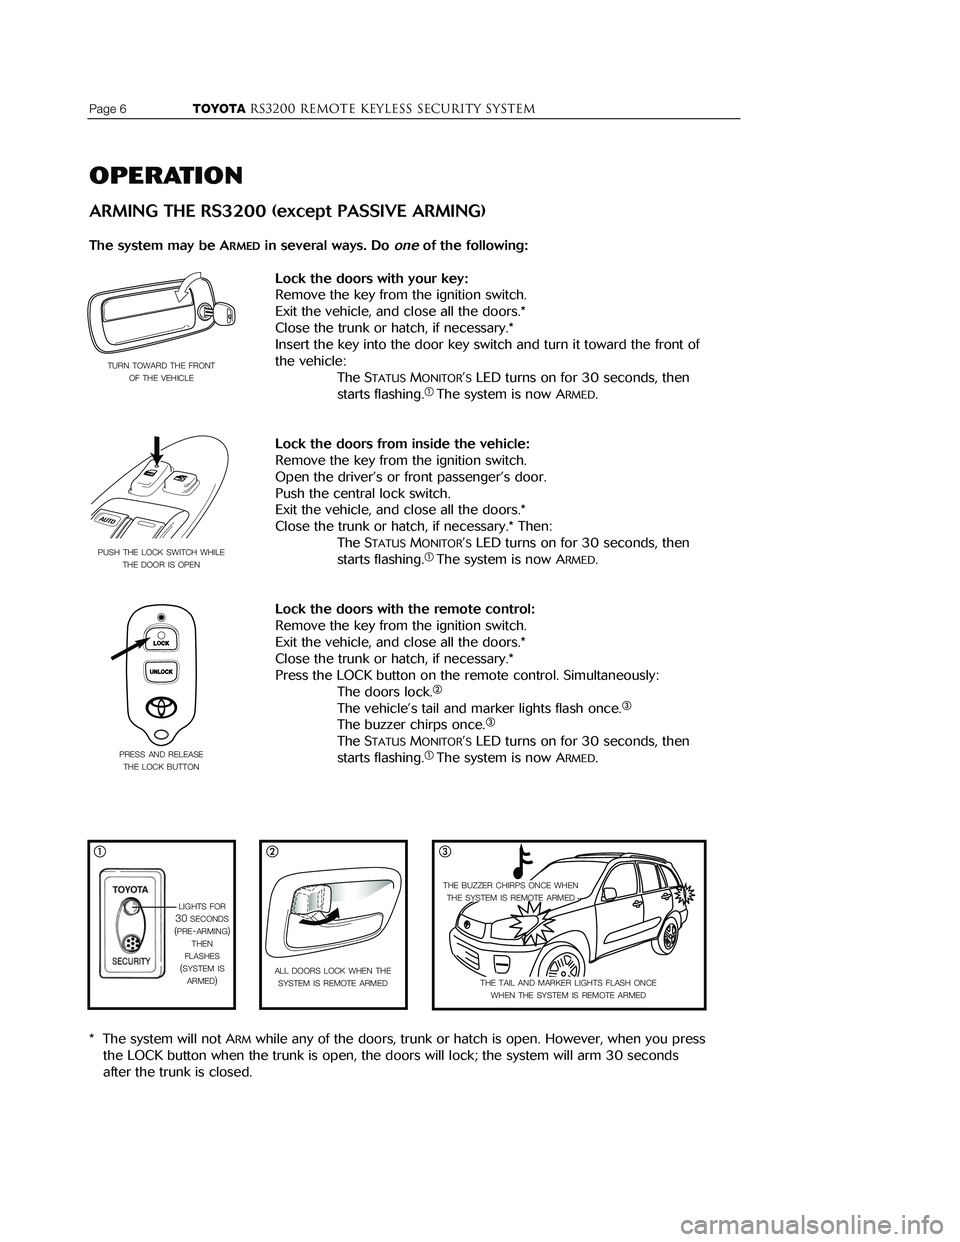 TOYOTA MR2 SPYDER 2001  Accessories, Audio & Navigation (in English) 
Page 6                  TOYOTARS3200 REMOTE KEYLESS Security system
OPERATION
ARMING THE RS3200 (except PASSIVE ARMING)
The system may be ARMEDin several ways. Do oneof the following: 
Lock the doors